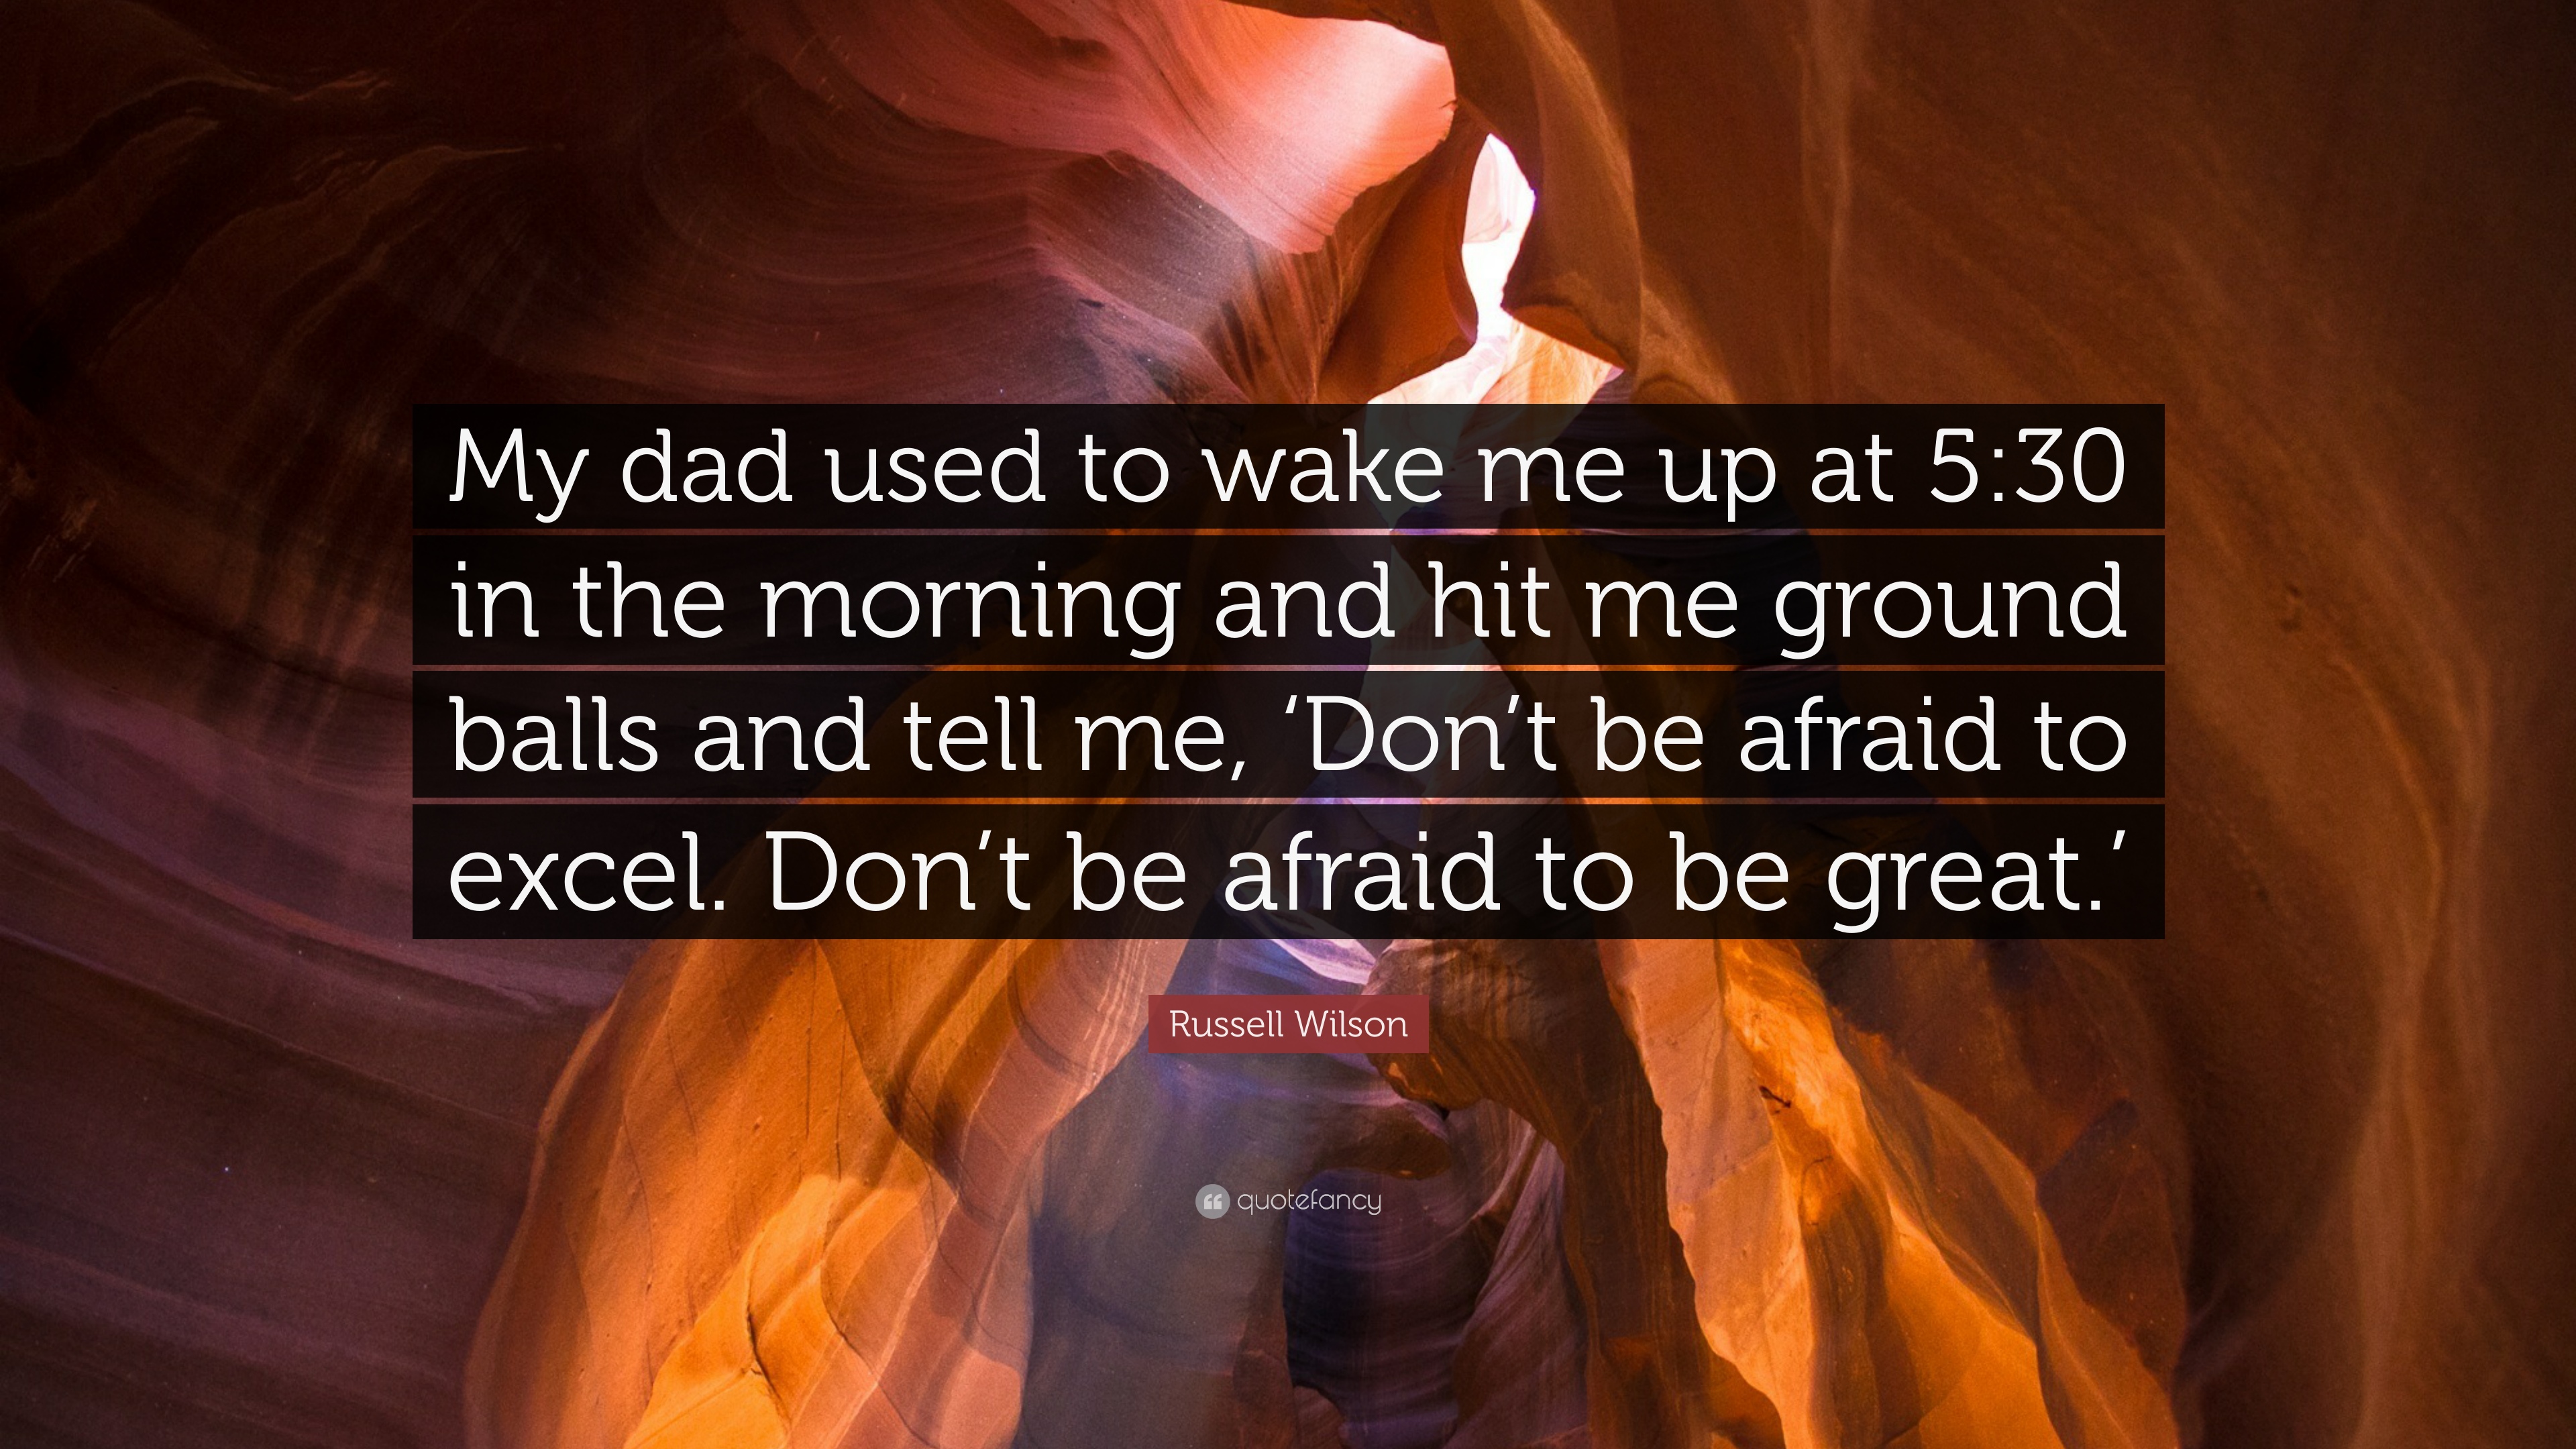 Russell Wilson Quote: “My dad used to wake me up at 5:30 in the ...